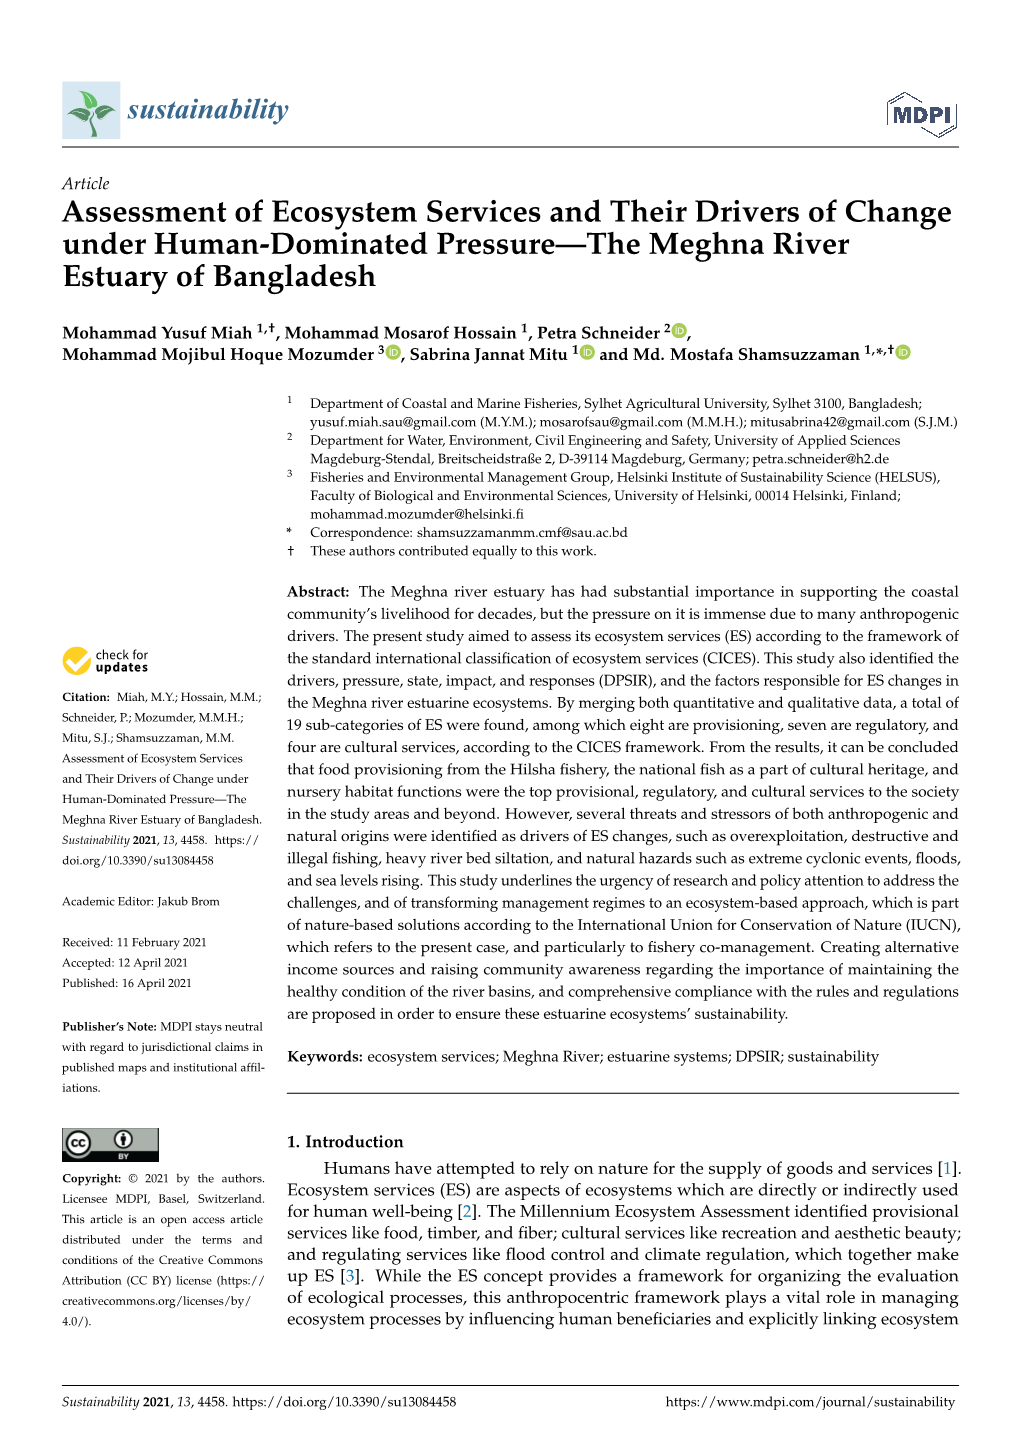 Assessment of Ecosystem Services and Their Drivers of Change Under Human-Dominated Pressure—The Meghna River Estuary of Bangladesh